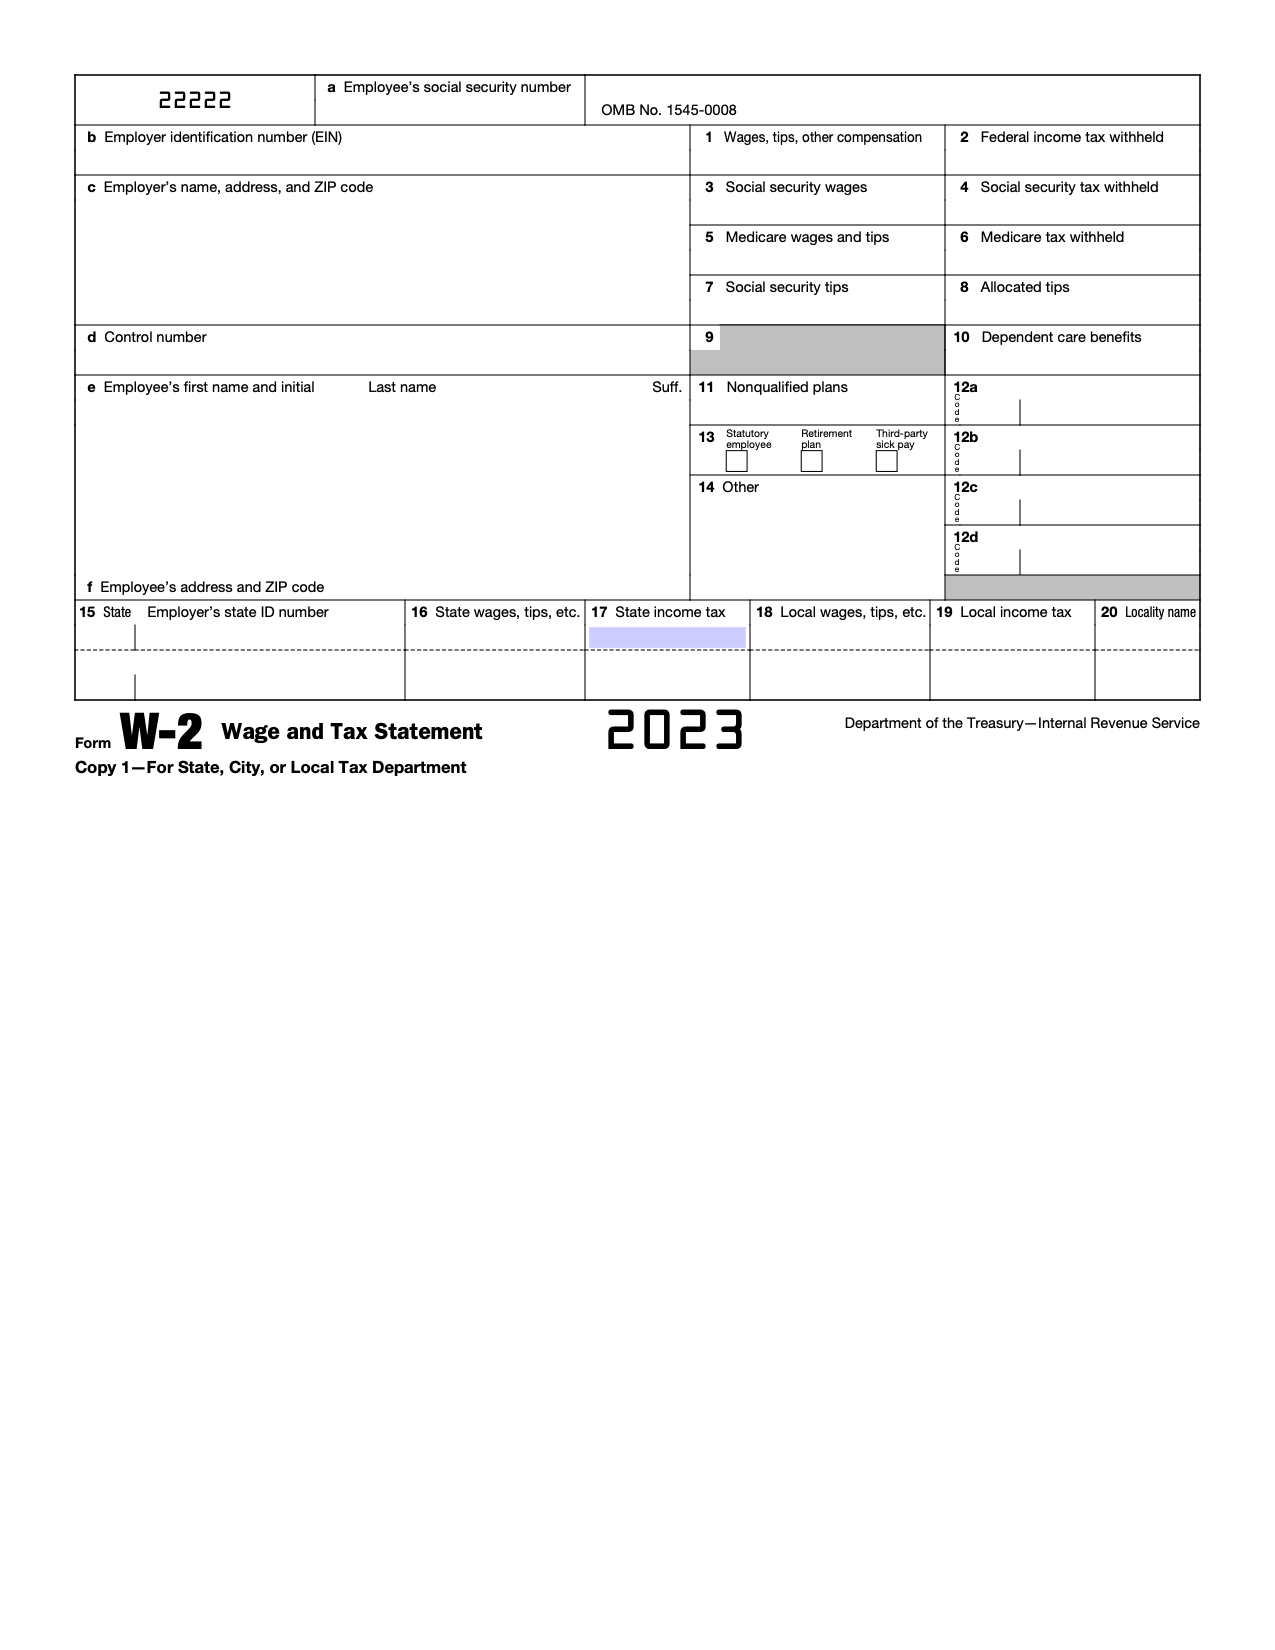 Free Irs Form W-2 | Wage And Tax Statement - Pdf – Eforms with Google W2 Former Employee